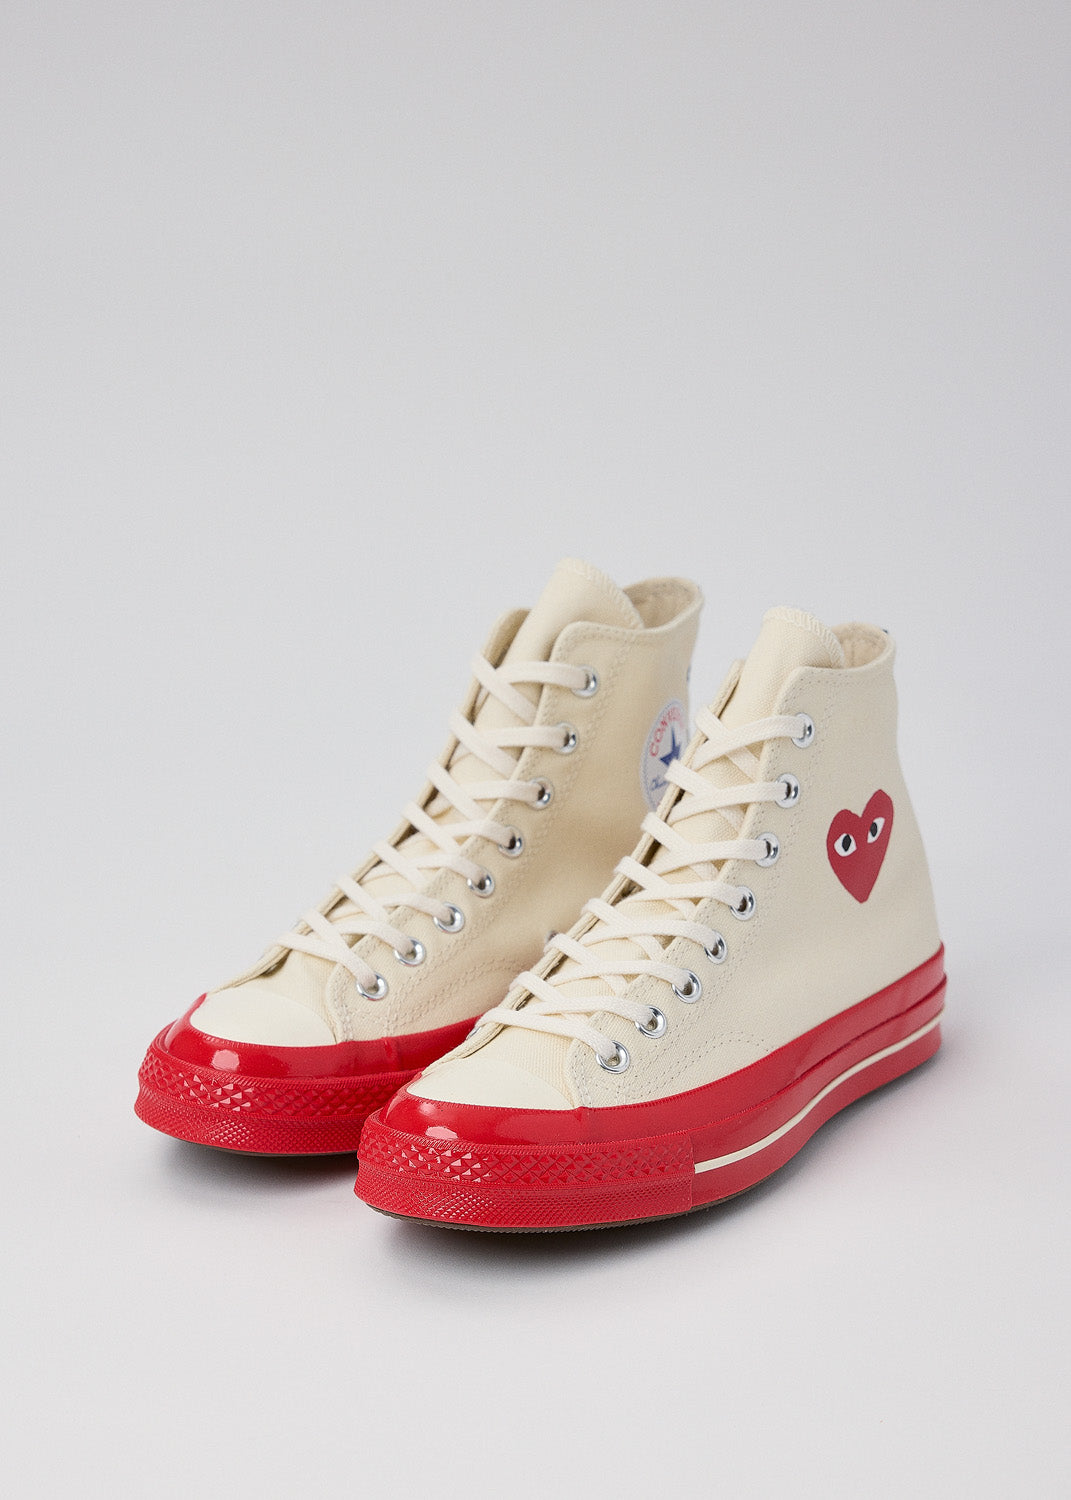 White CDG Chuck 70 Red Sole High Sneakers